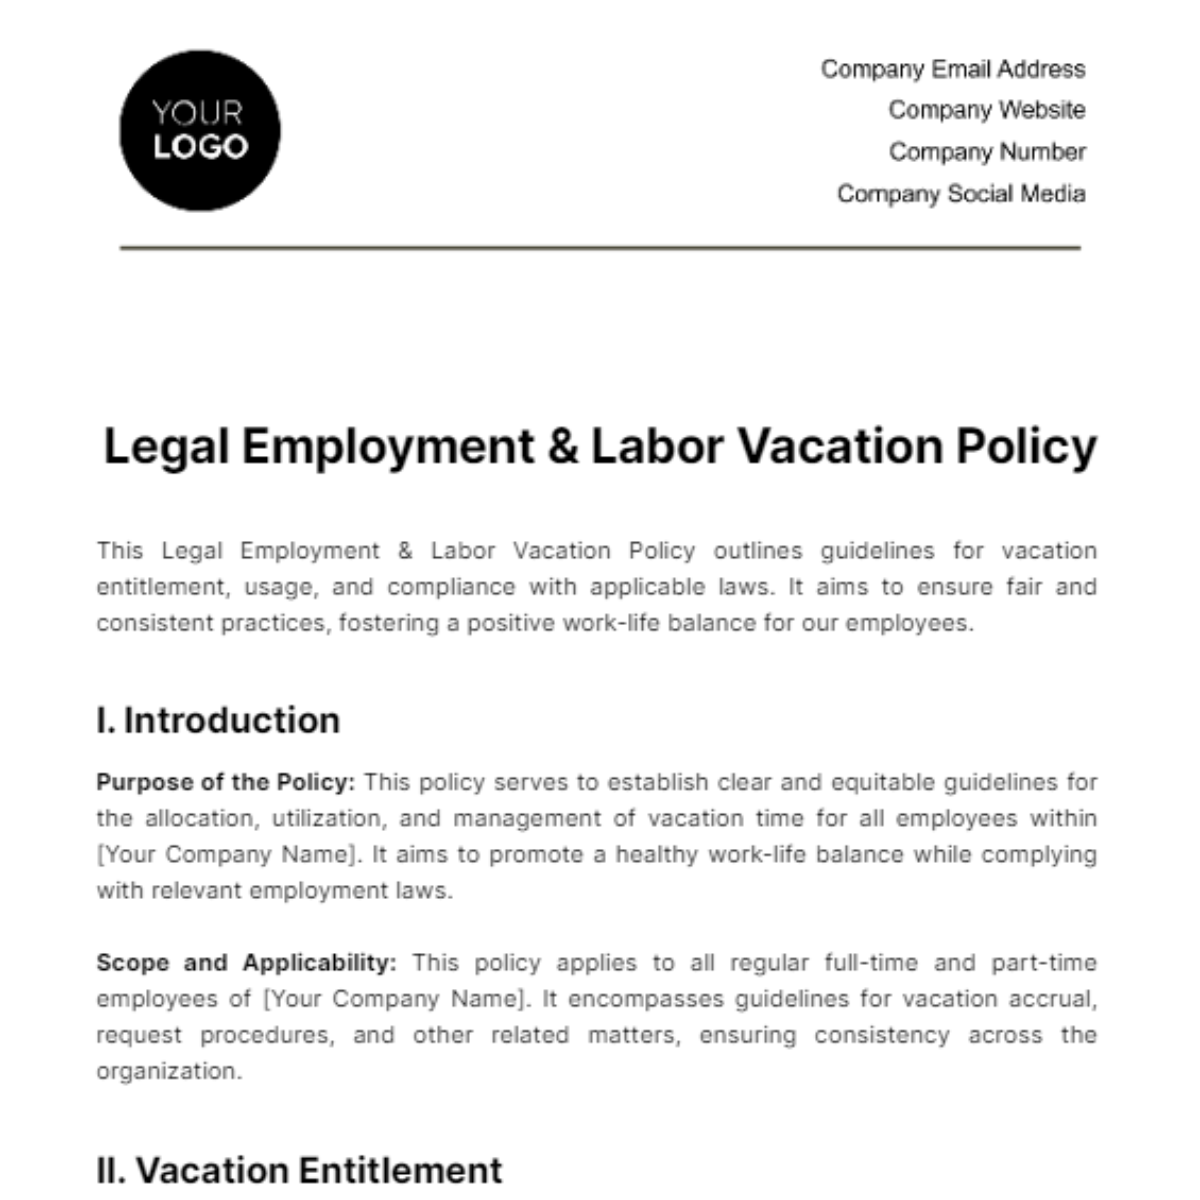 Free Legal Employment & Labor Vacation Policy Template